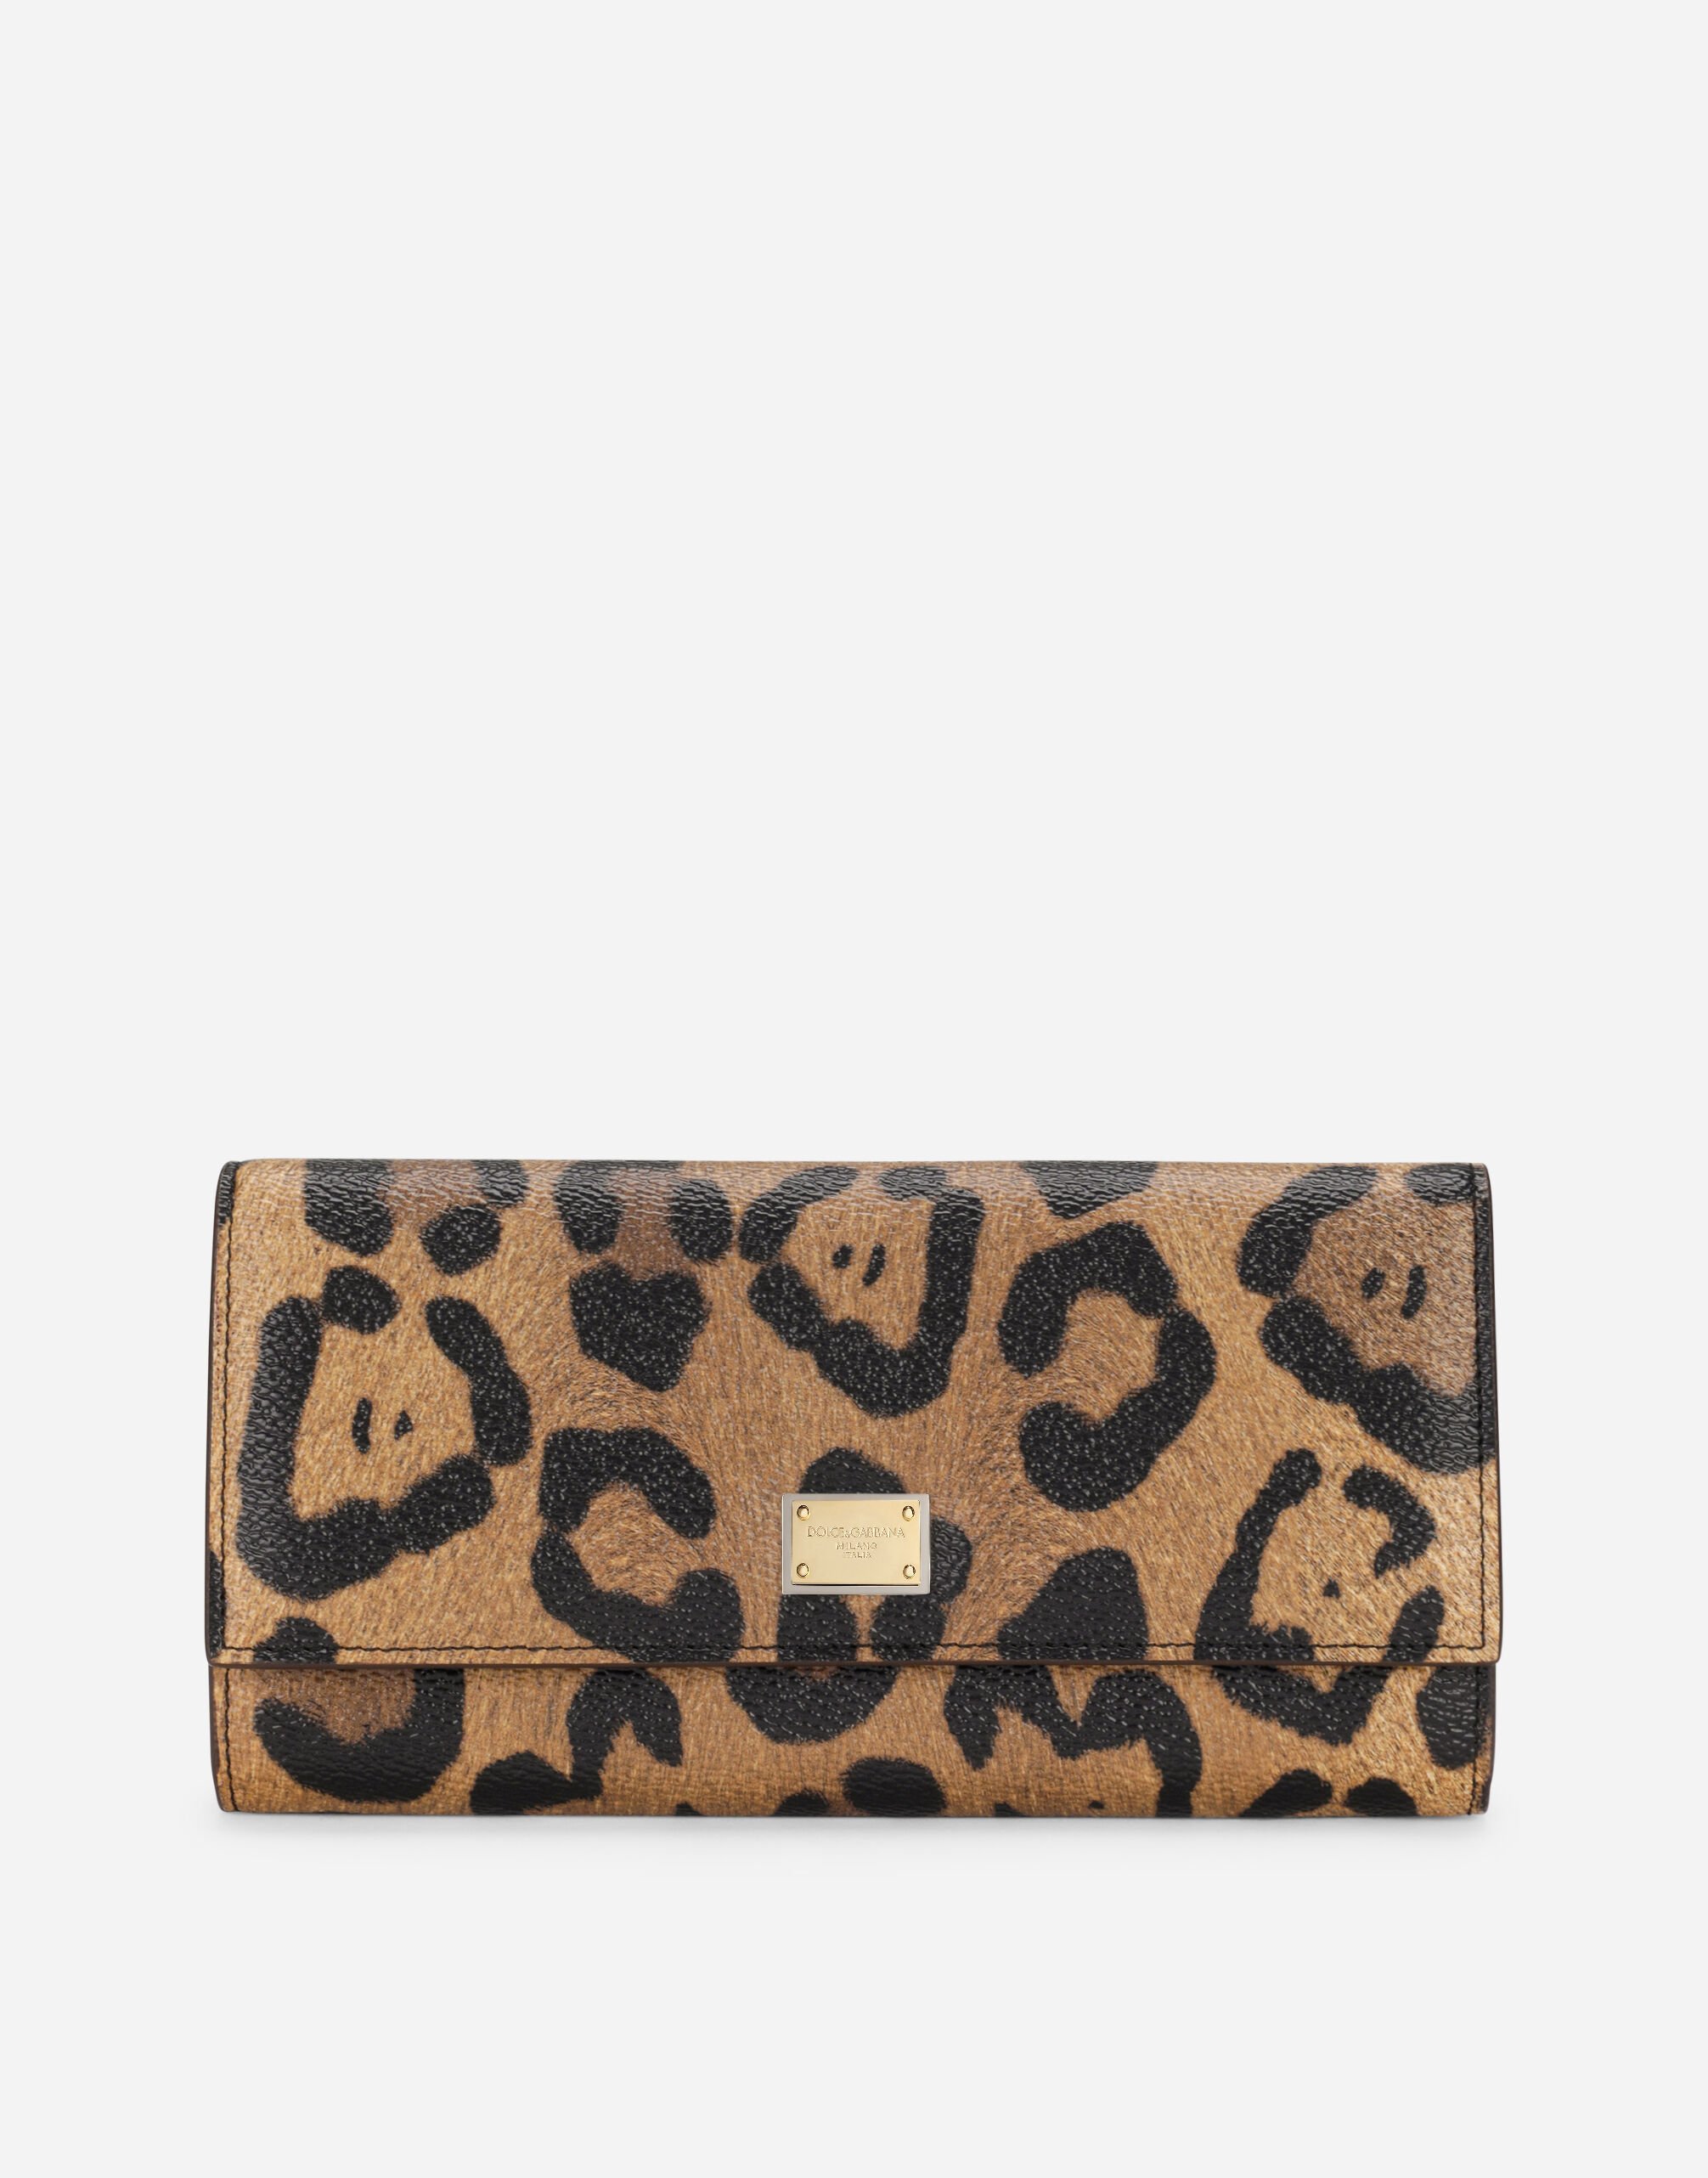 Dolce & Gabbana Leopard-print Crespo continental wallet with branded plate Multicolor BB2206AW384